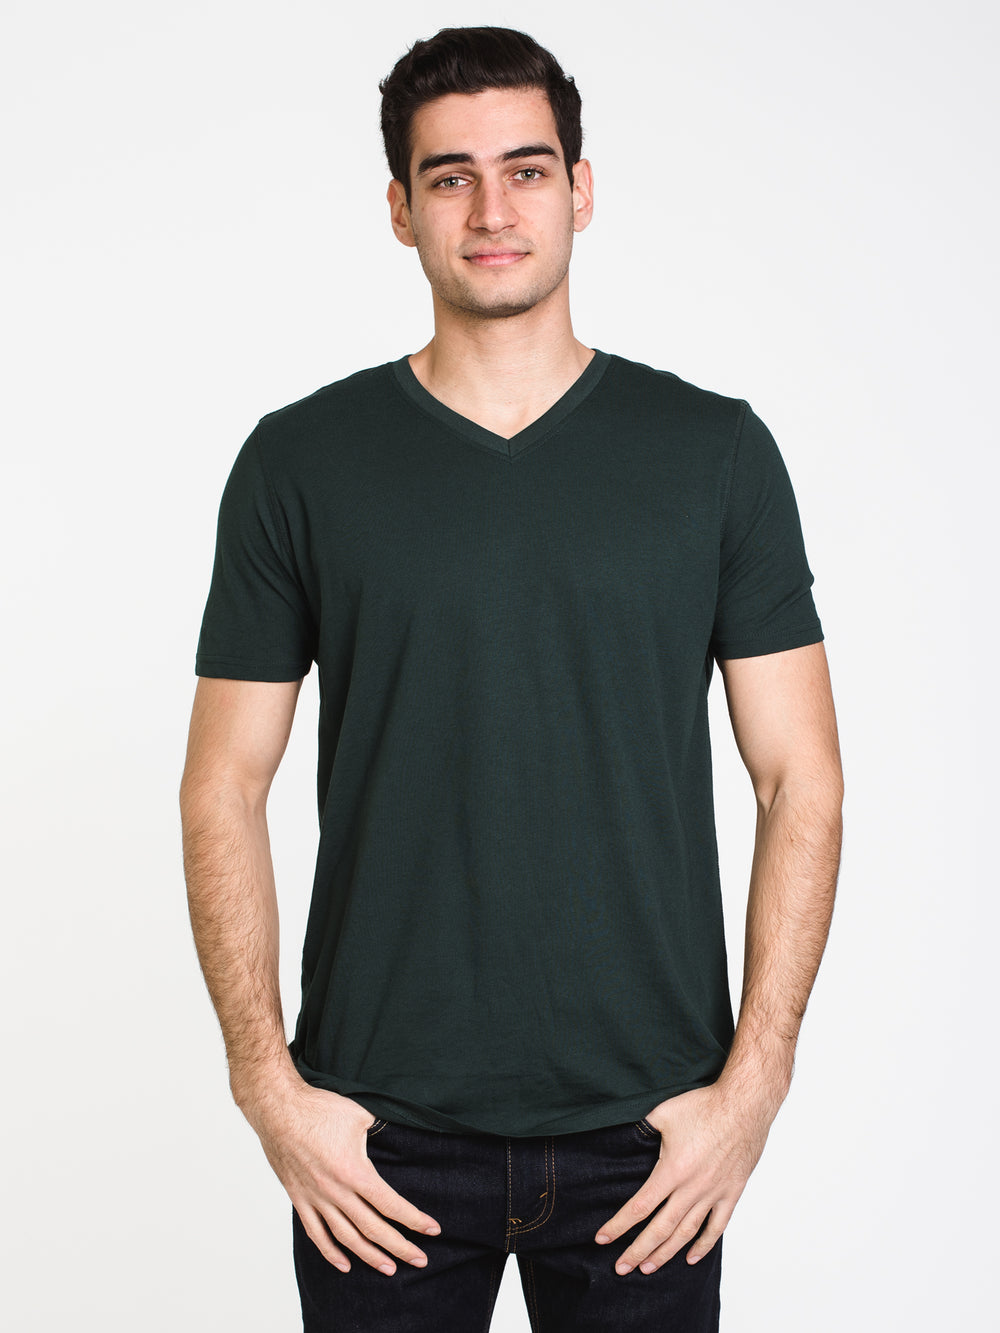 MENS VICTOR VNECK T - FOREST - CLEARANCE